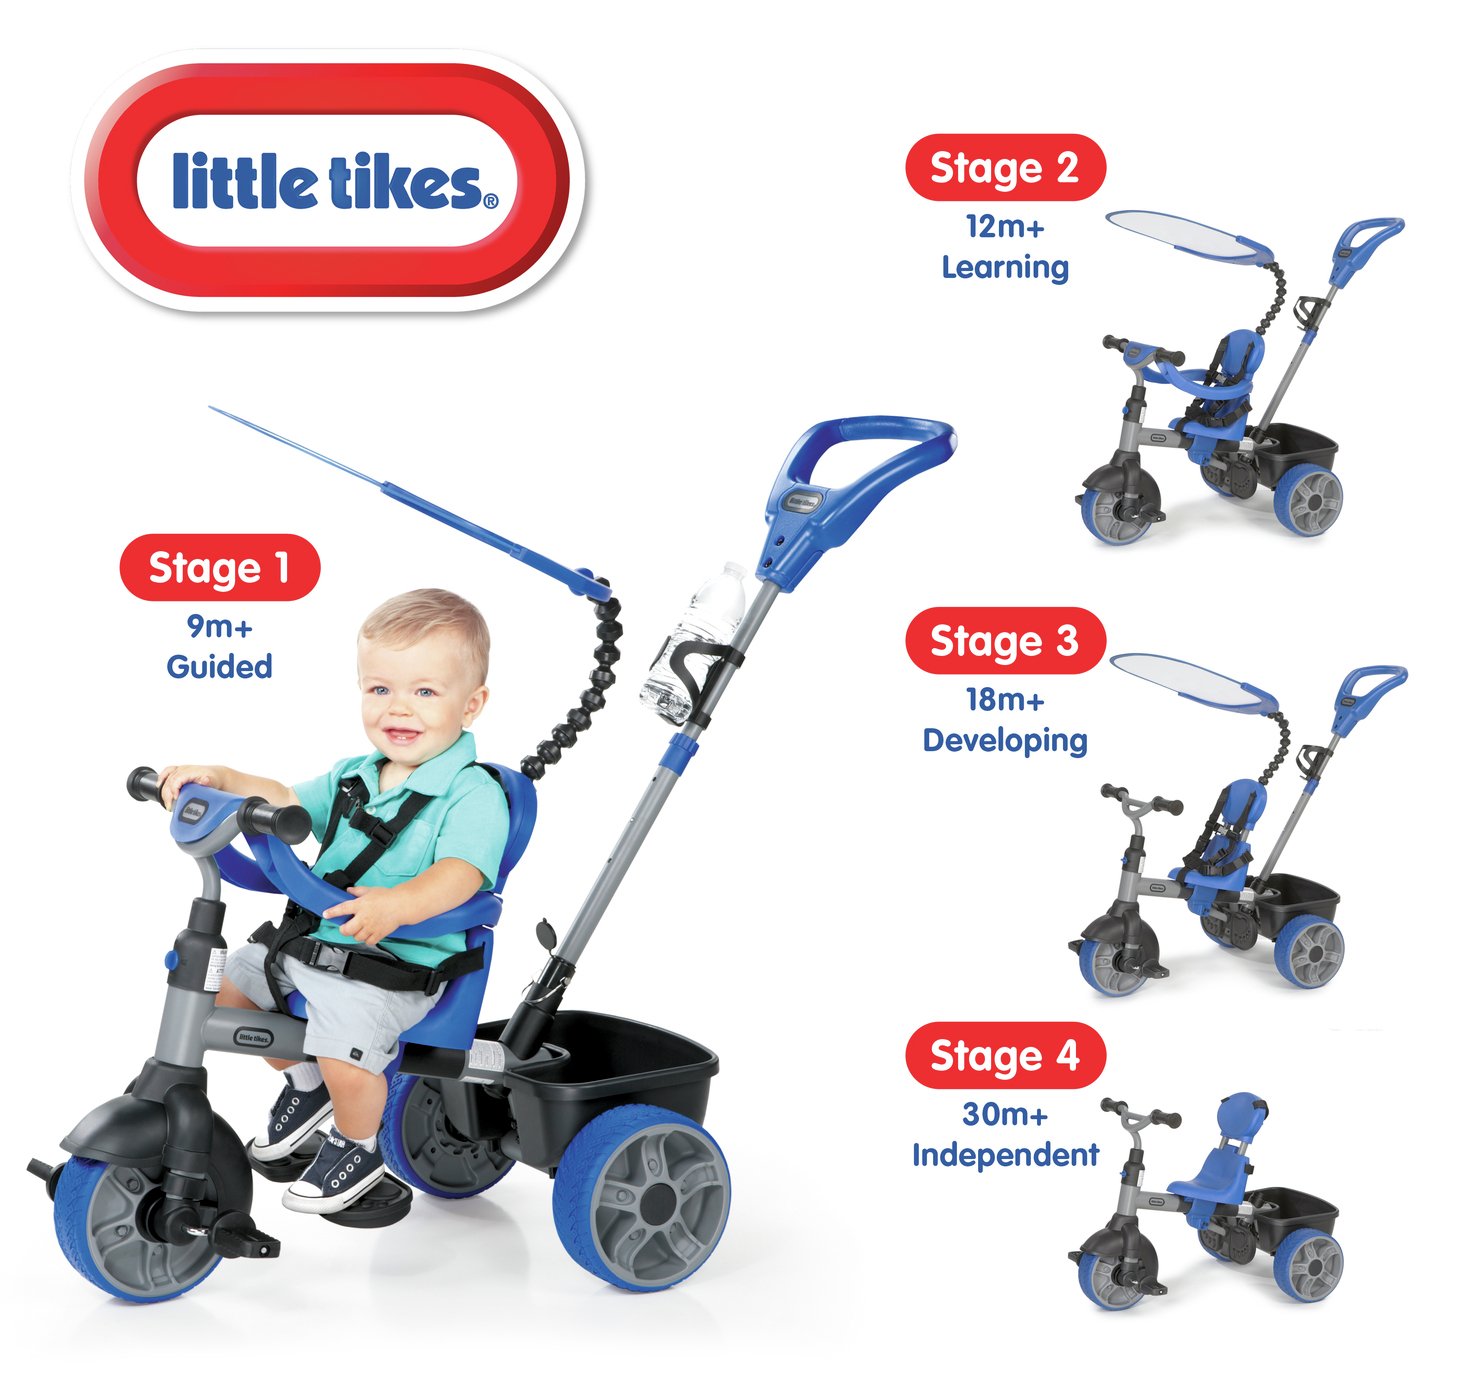 Little Tikes 4-in-1 Trike Review